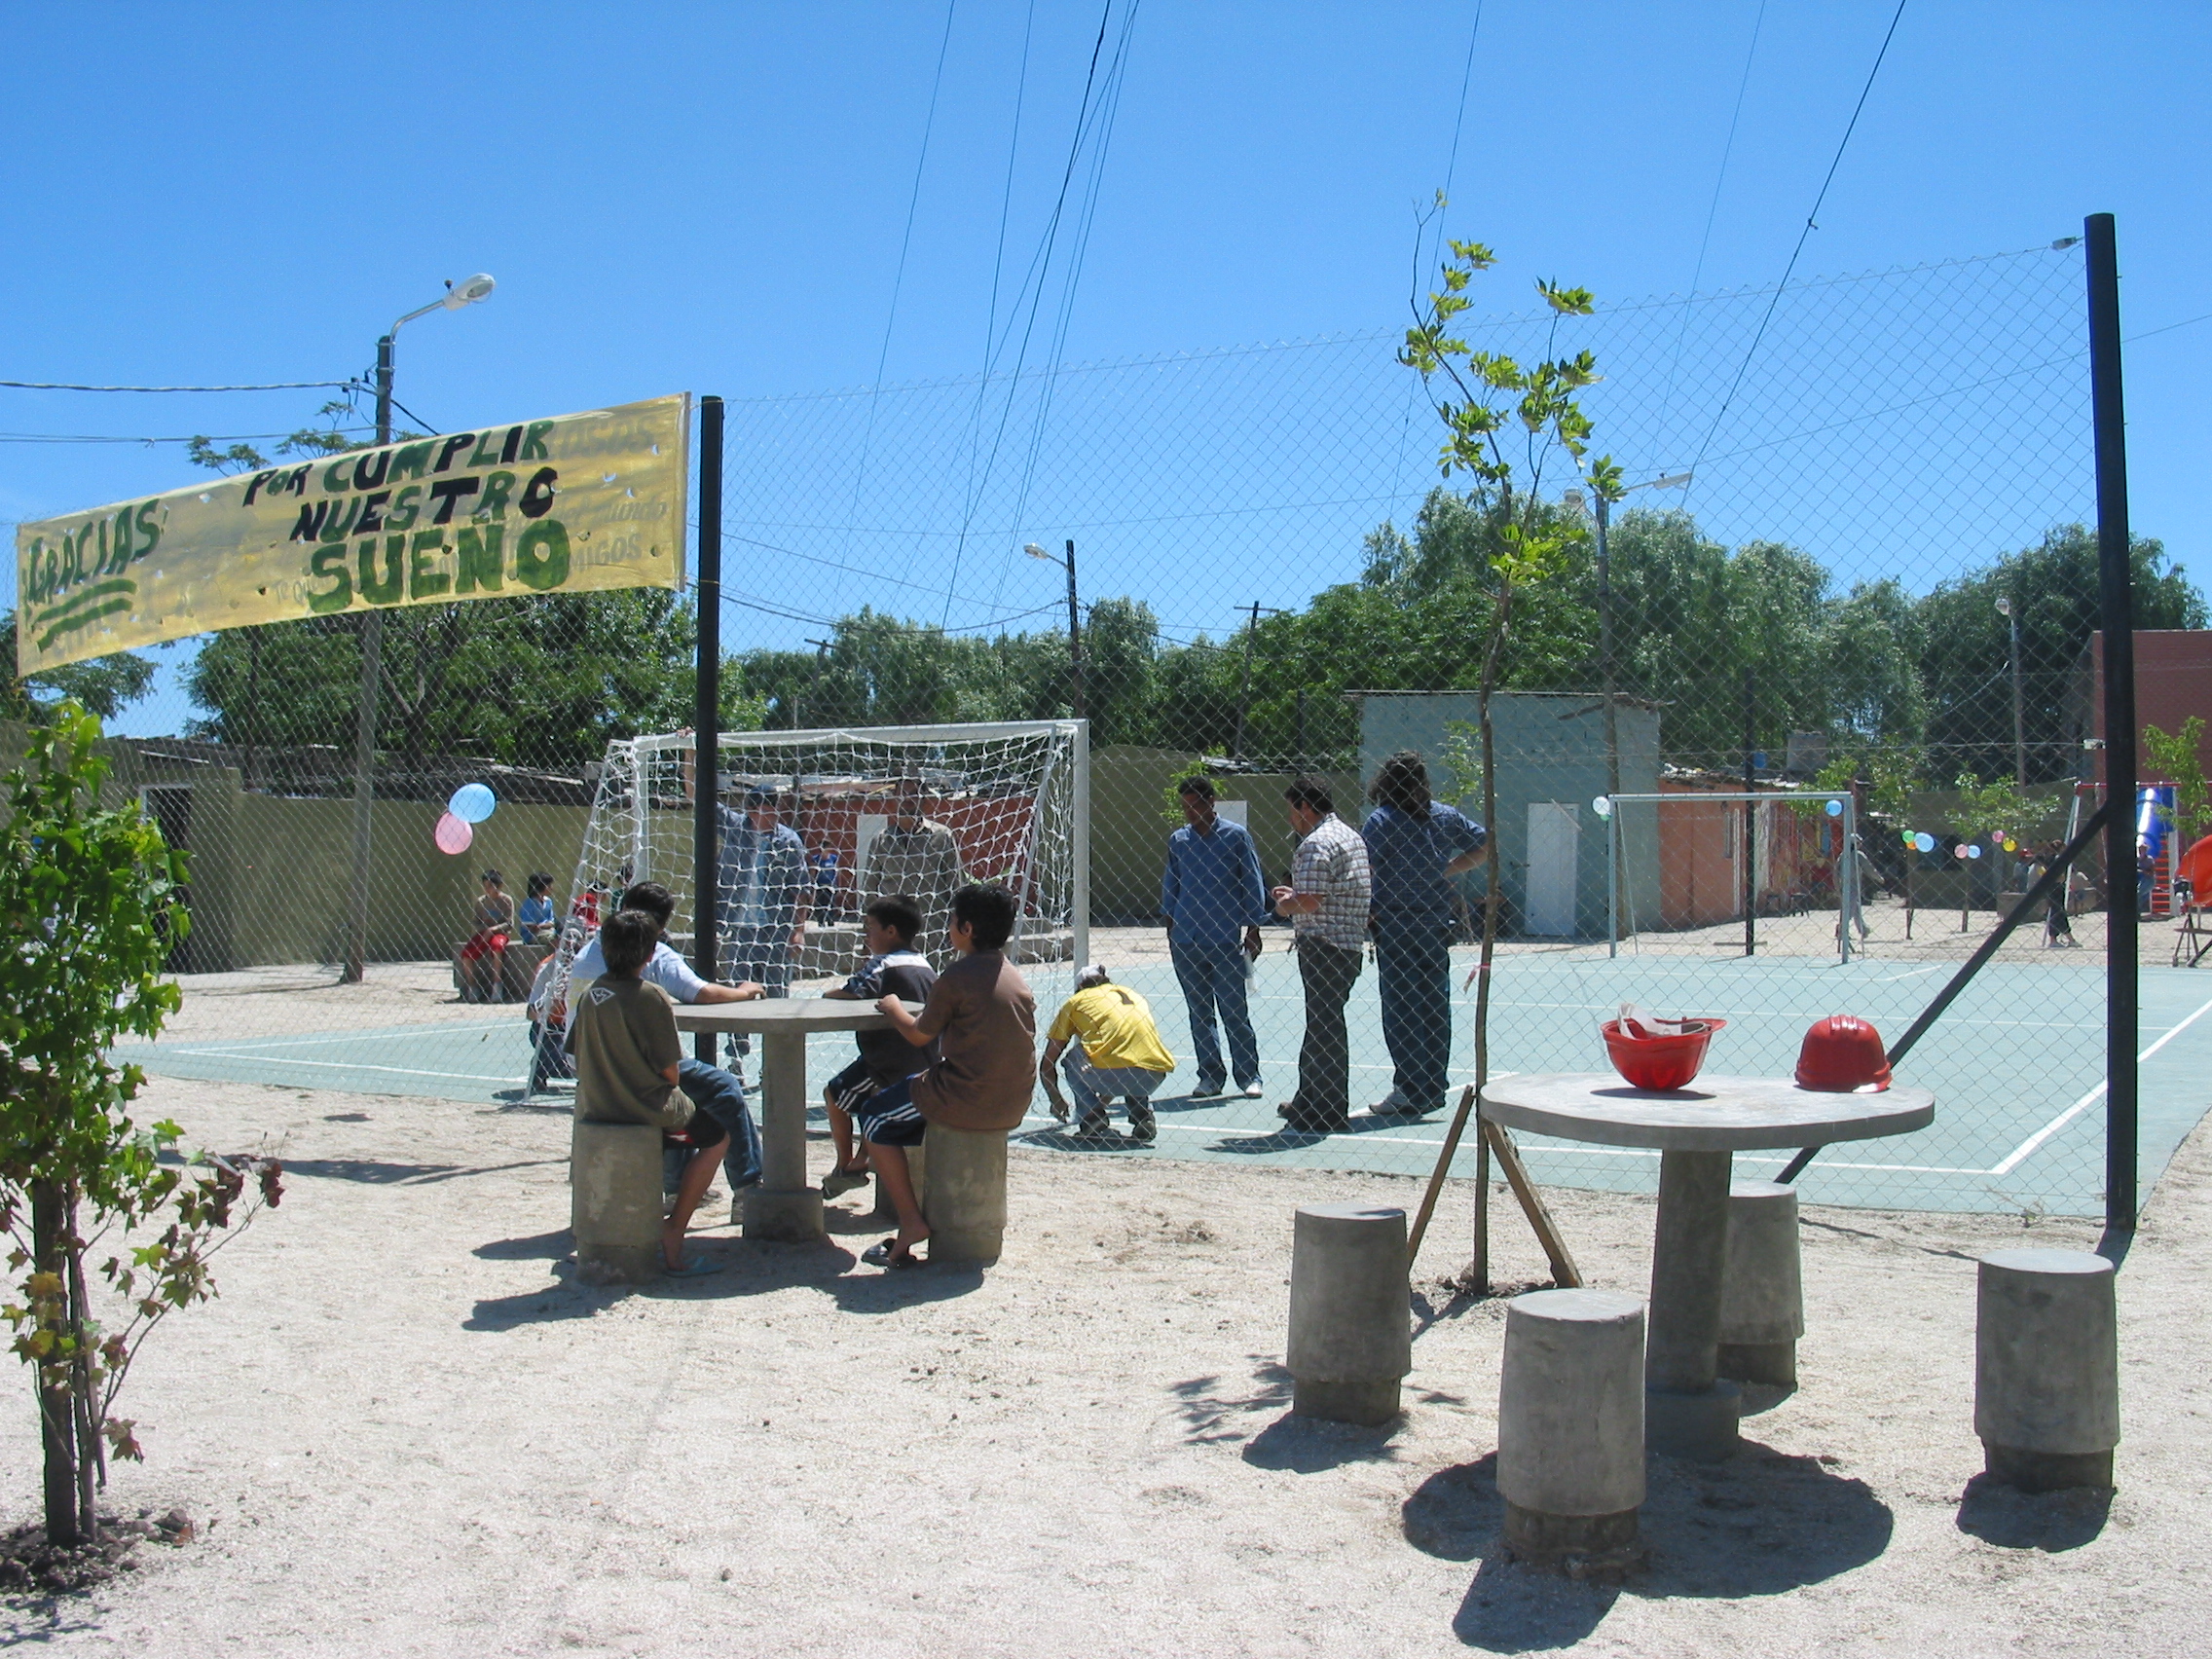 A group of children sitting at a table outside and men repairing a soccer goal at a field.